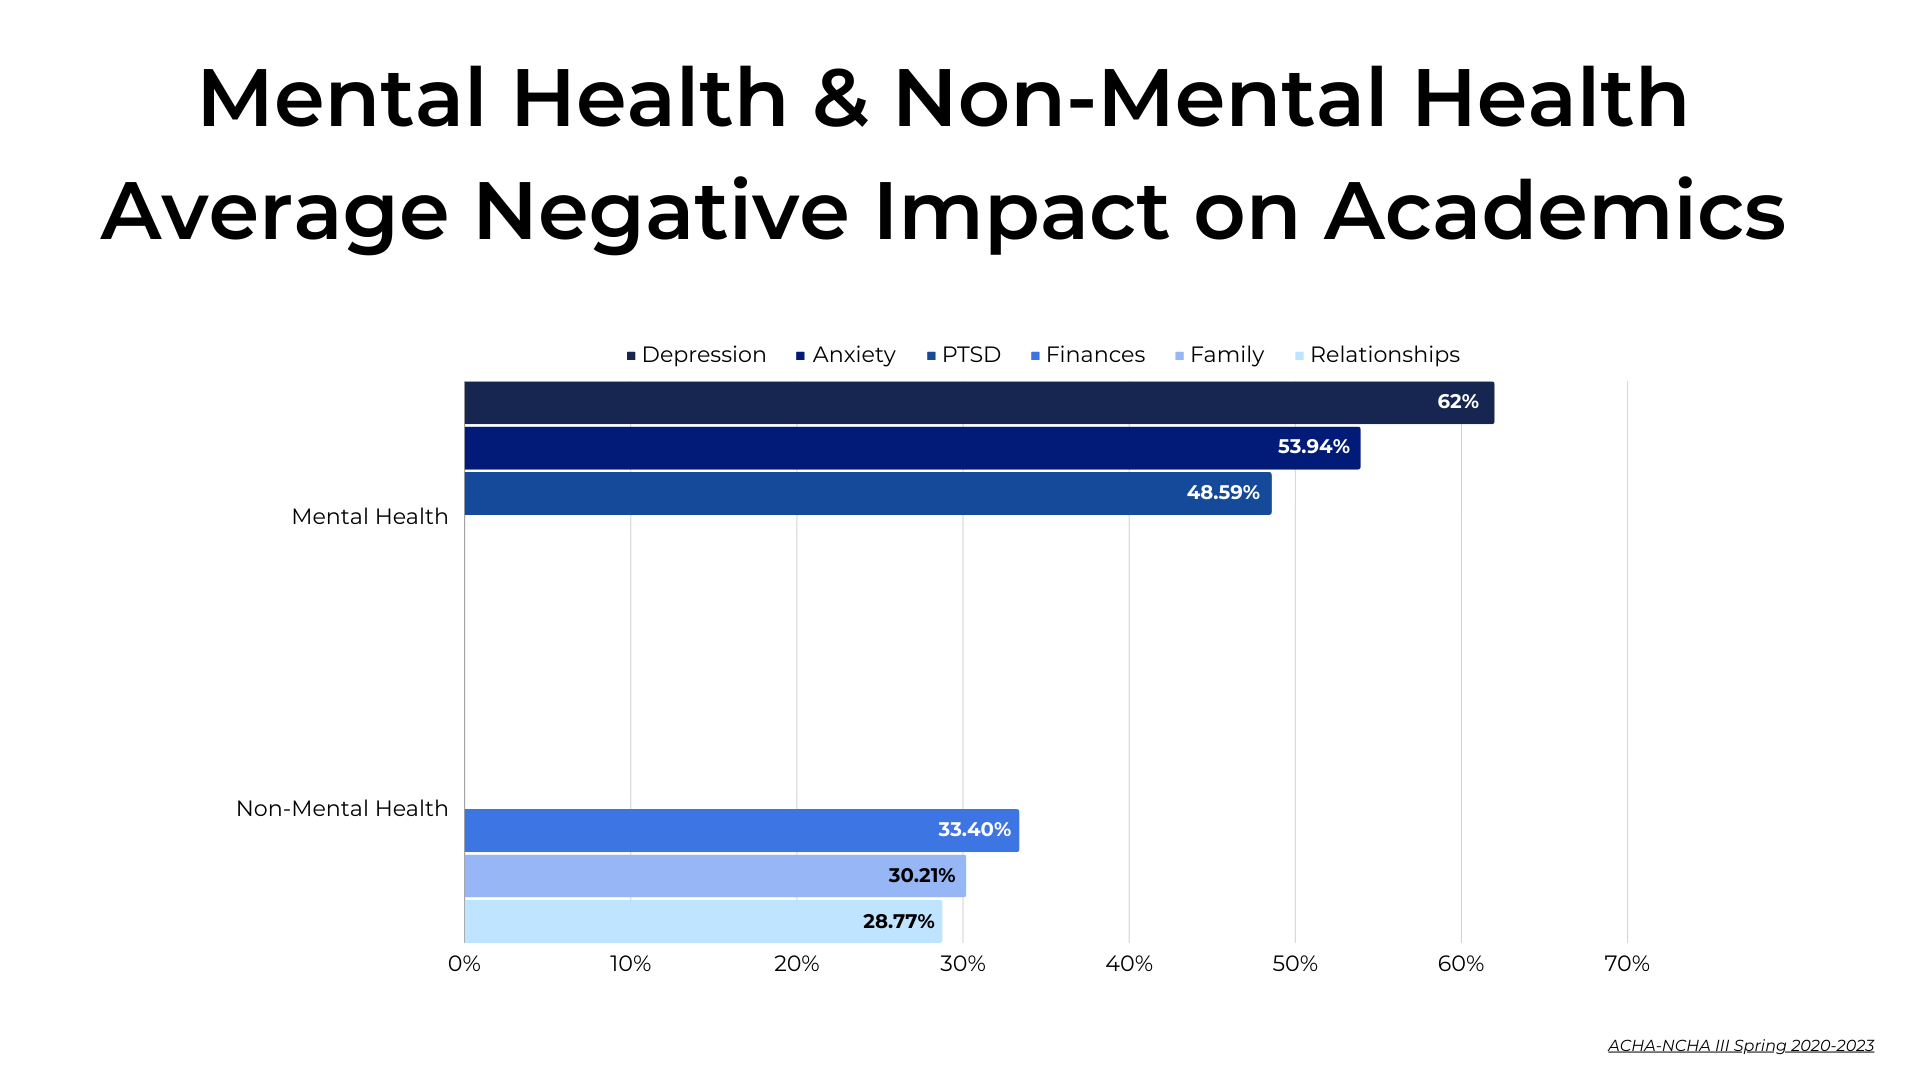 Mental Health & Non-Mental Health Average Negative Impact on Academics: bar graph of depression (62%), anxiety (53.94%), PTSD (48.59%), finances (33.40%), family (30.21%), and relationships (28.77%).